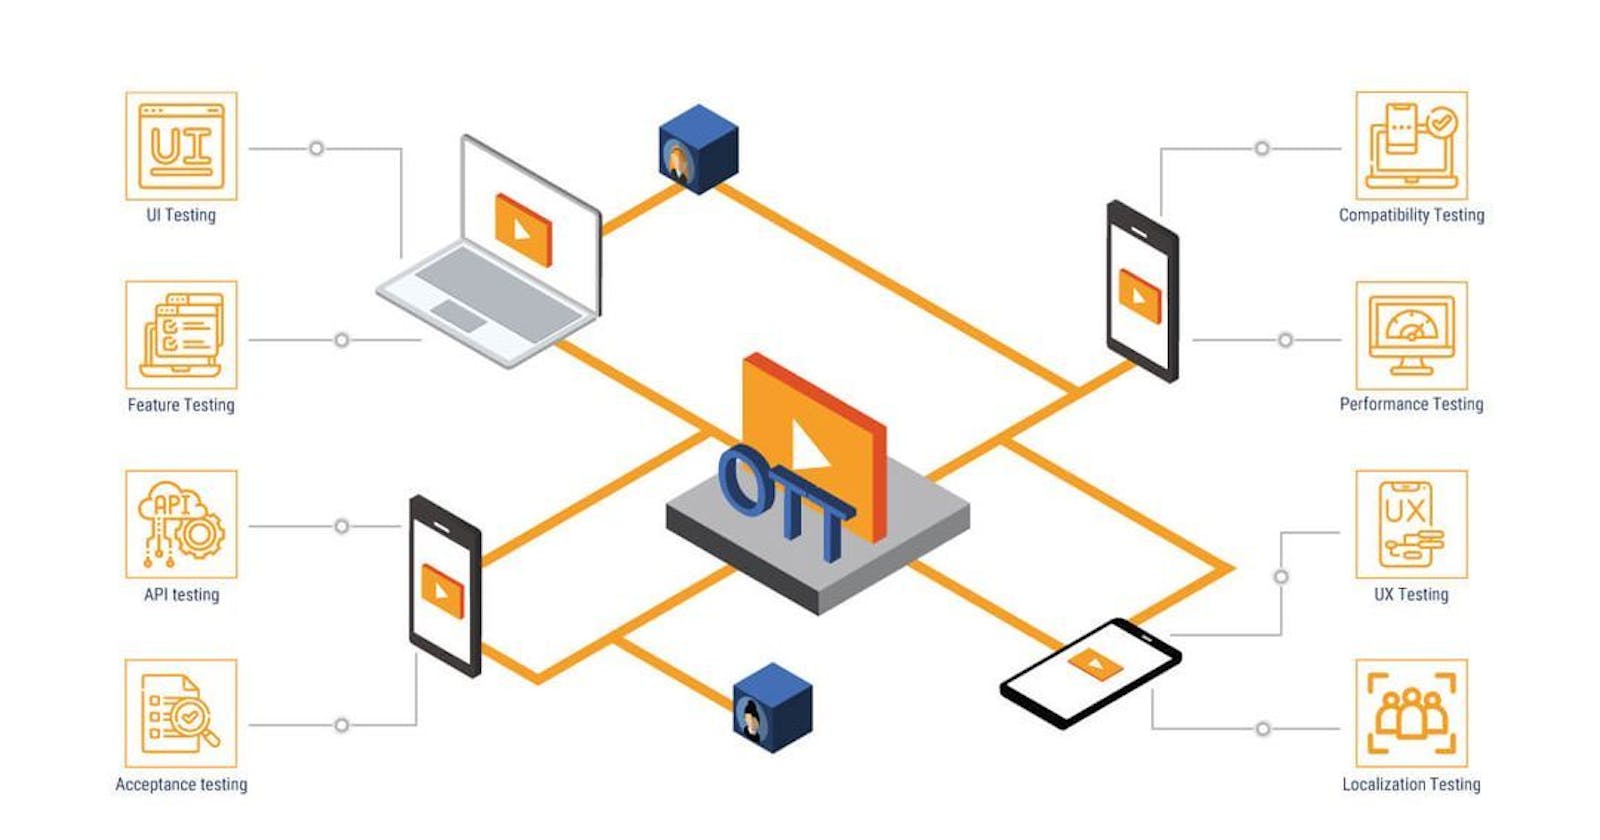 OTT Testing Guide - What is it, Checklist, Best Practices, Challenges, and Solutions